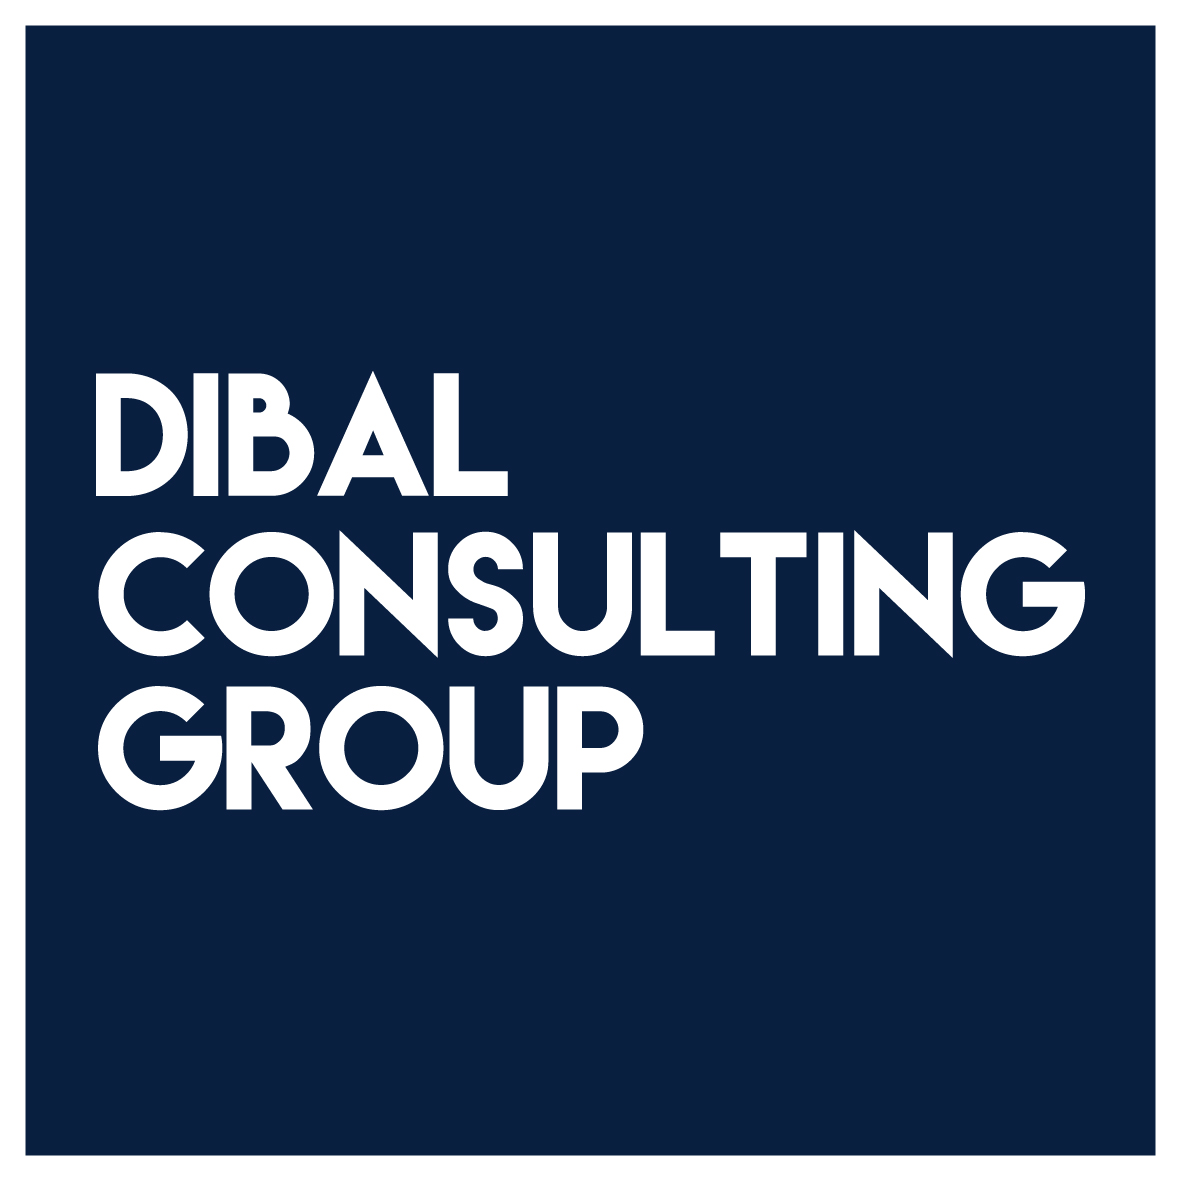 DIBAL CONSULTING GROUP